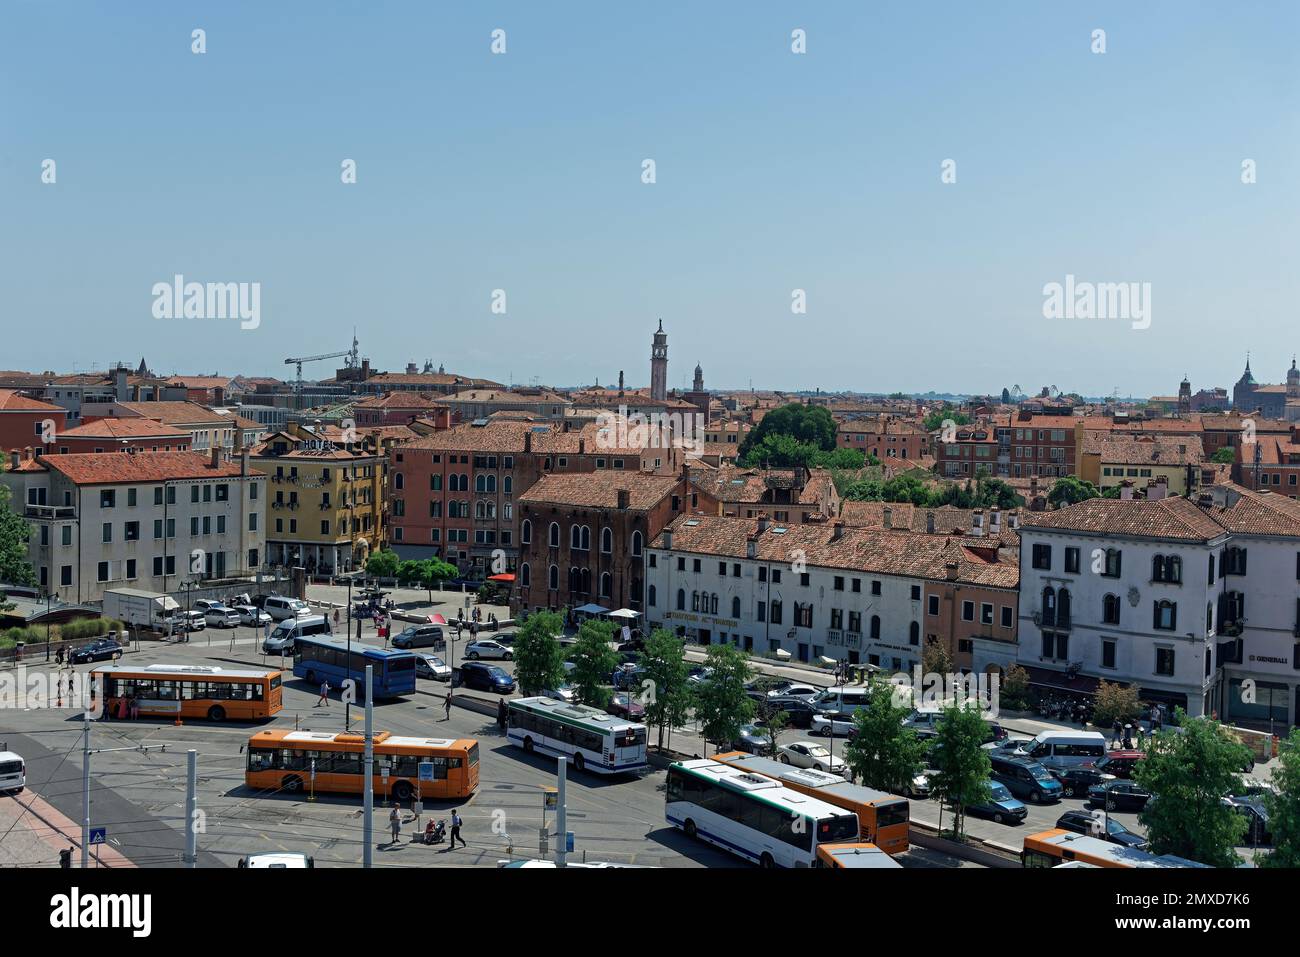 Venice Bus Station Piazzale Roma Stock Photo